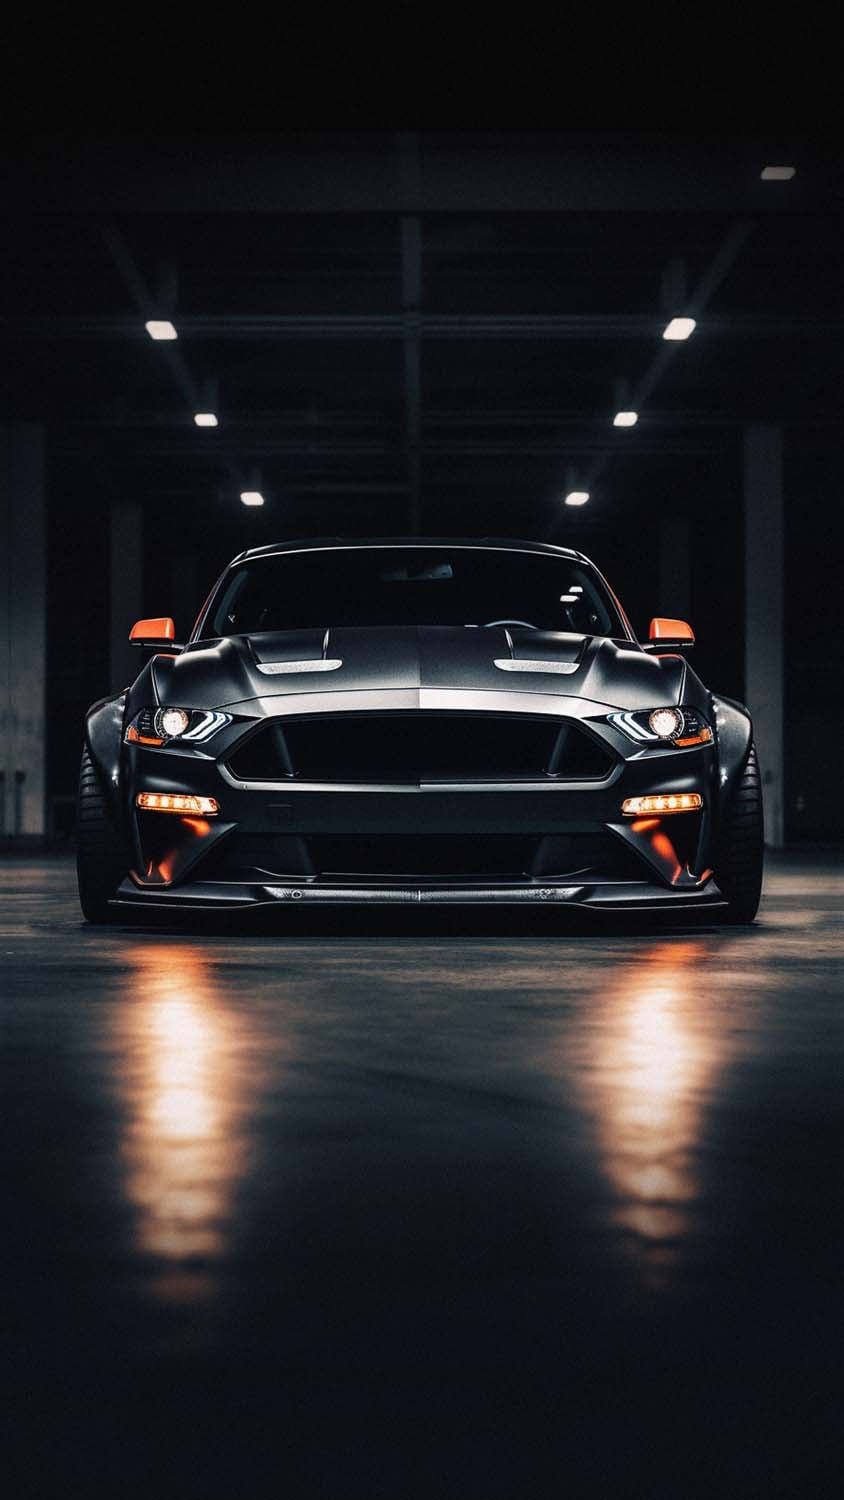 Ford IPhone Wallpaper 71 images